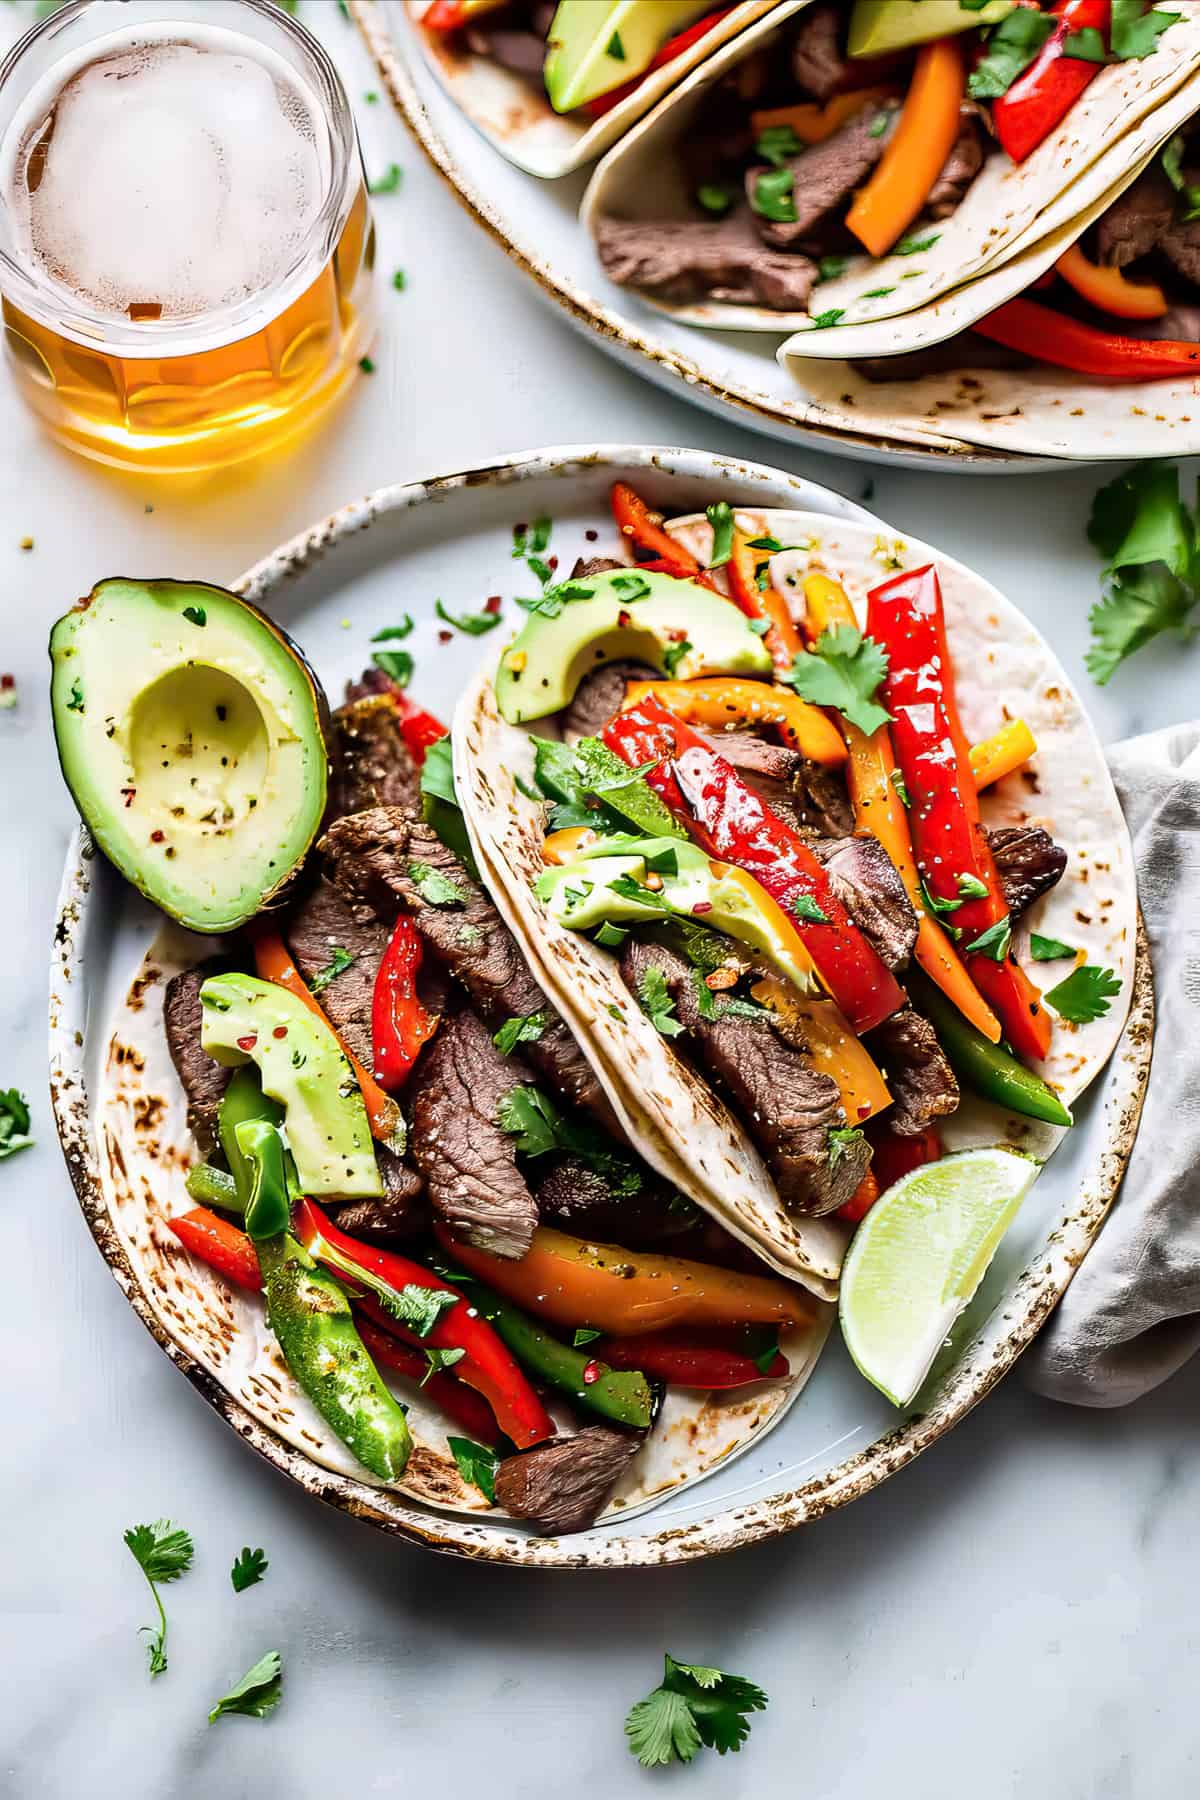 Marinated flank steak fajitas with peppers and avocado.